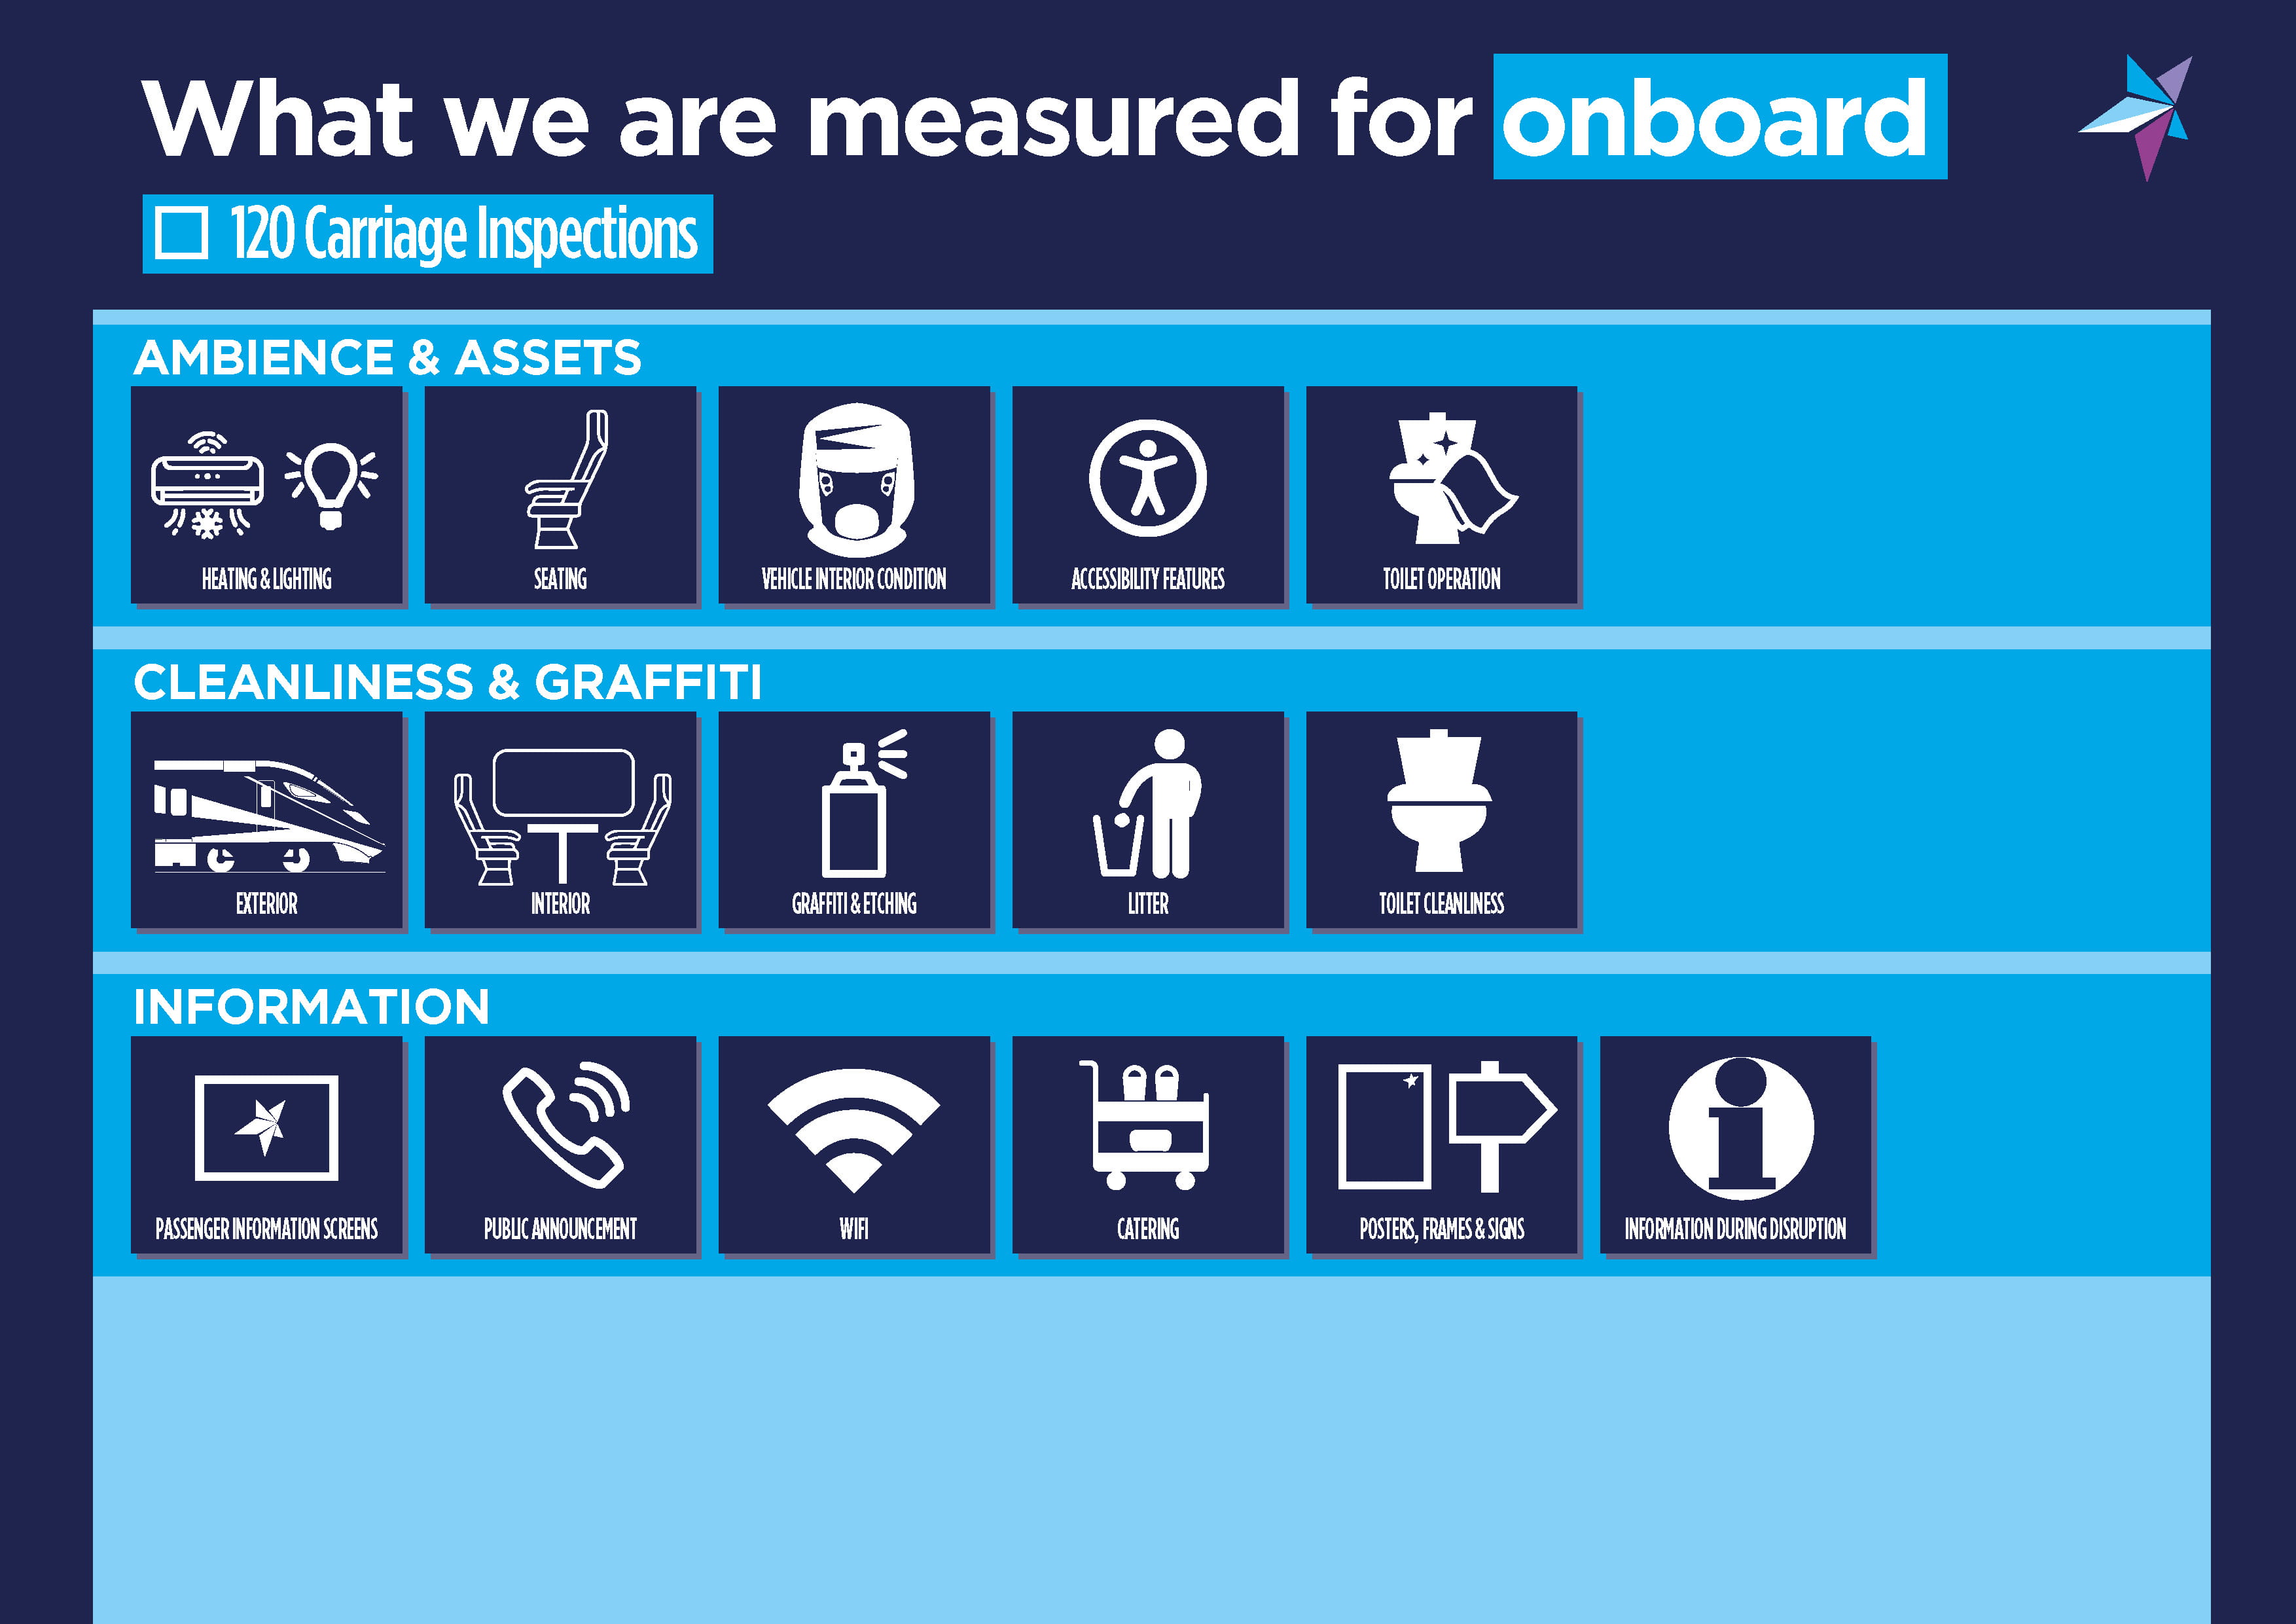 An infographic showing what we are measured for onboard during a check